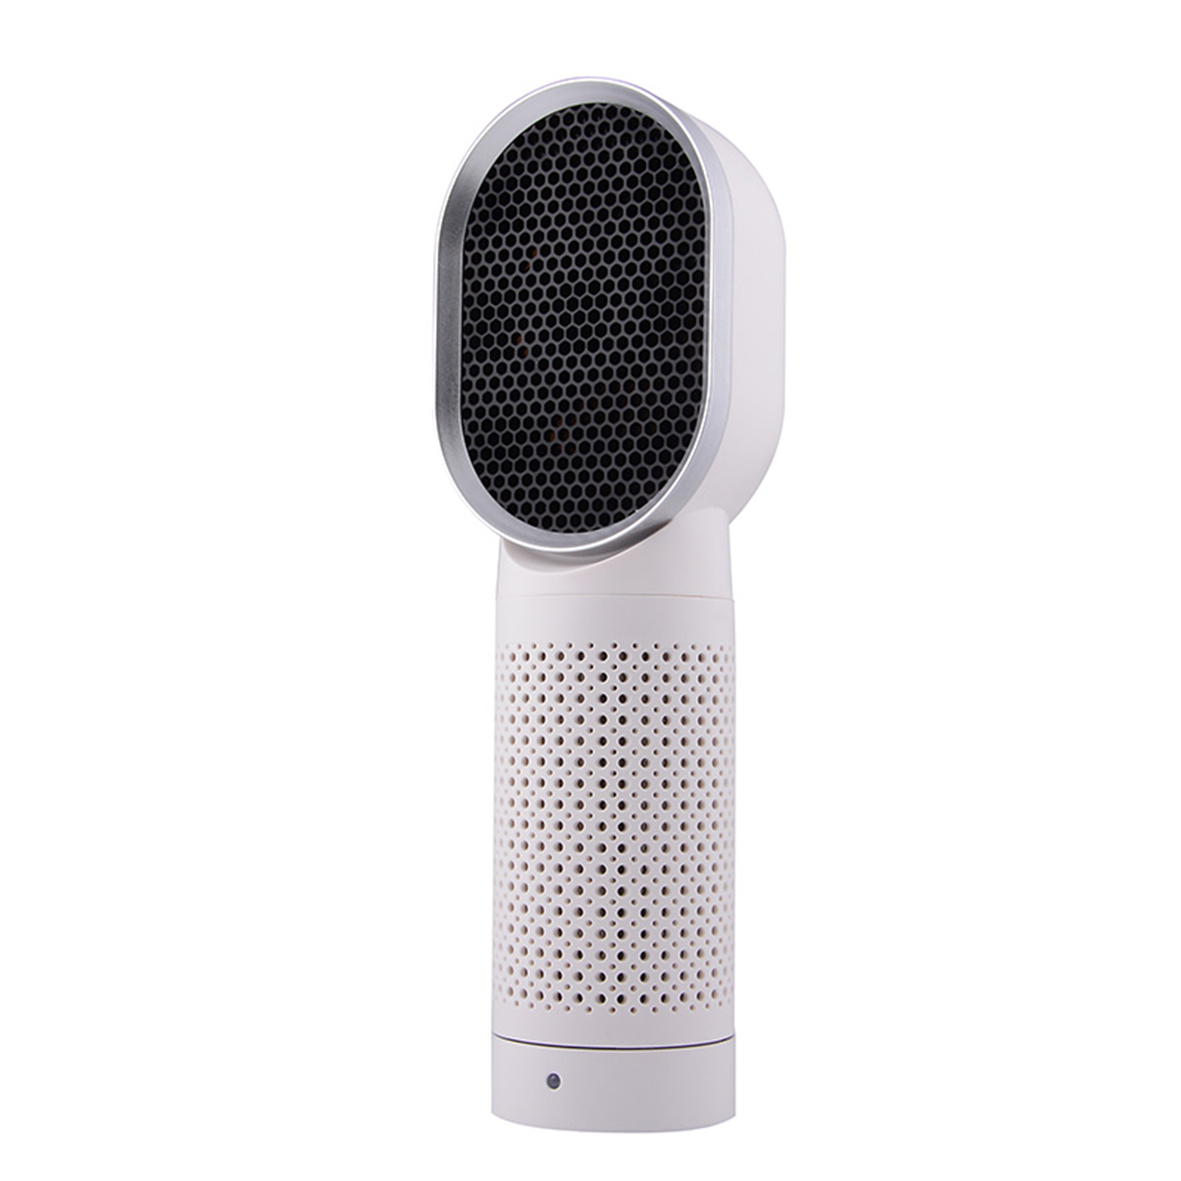 2018 hot new desktop air purifier SPA HEPA activated carbon anion net beauty air purifier for best gift promotion air purifier